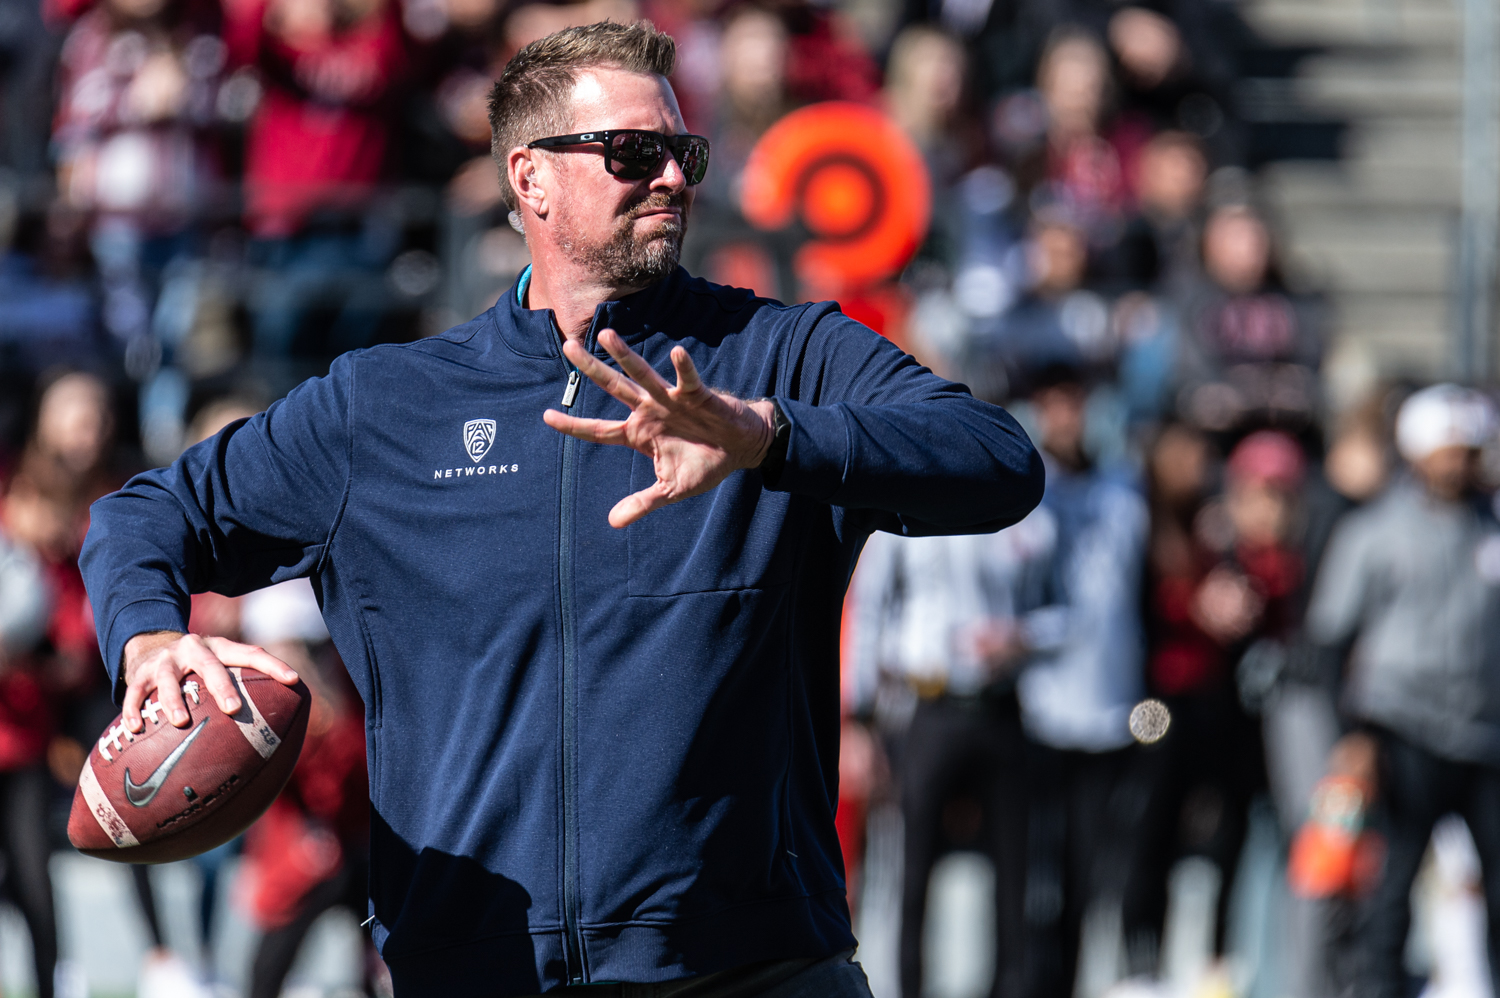 QB Ryan Leaf: Old Coug becomes college coach